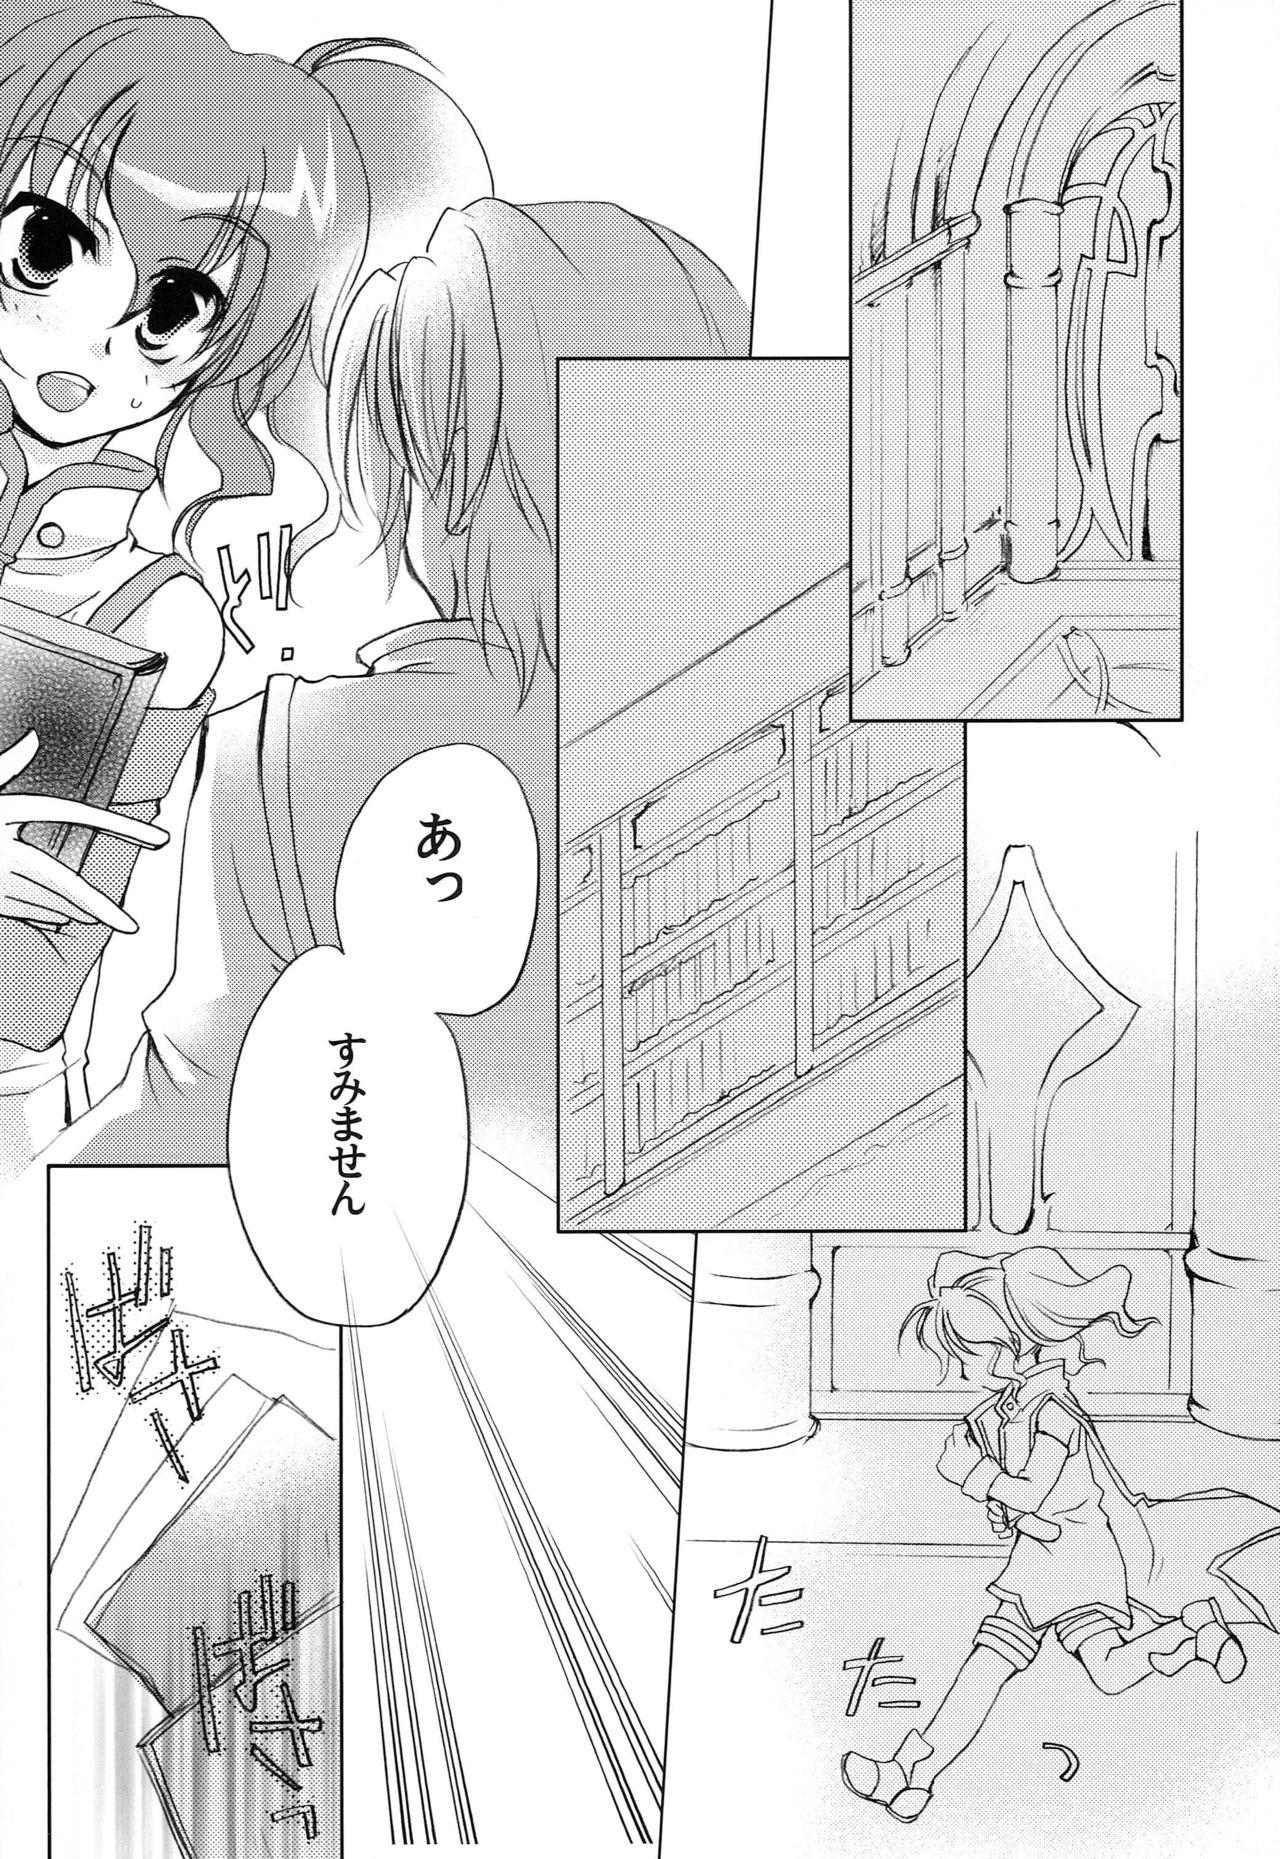 Australian Carnation, Lily, Lily, Rose - Tales of the abyss Rubia - Page 3